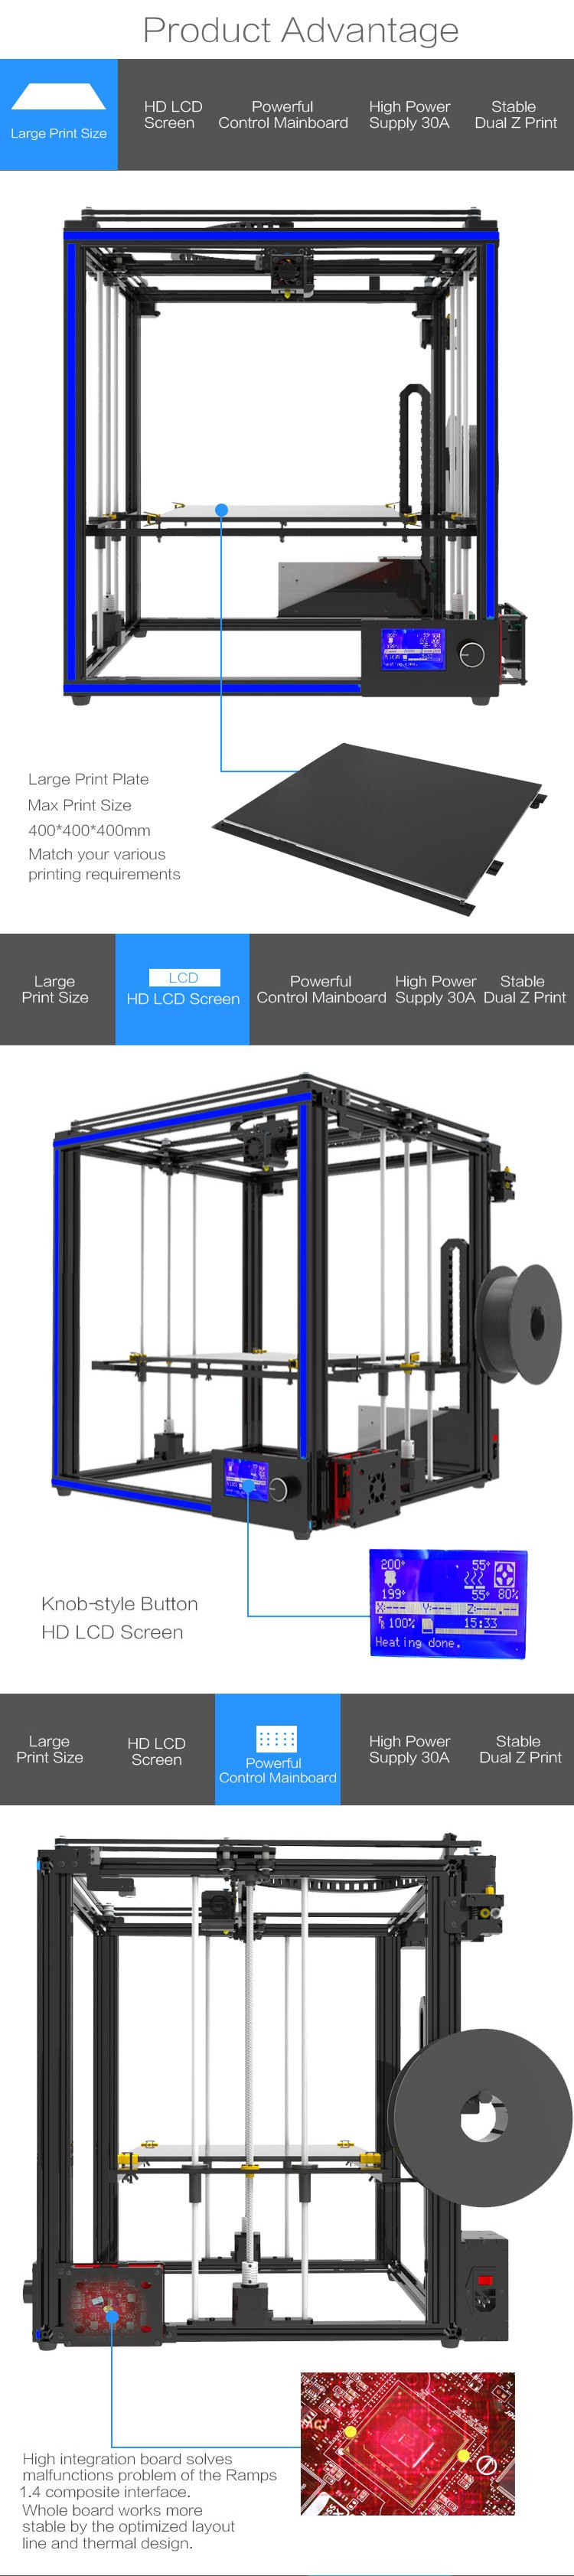 TRONXY® X5S-400 DIY Aluminum 3D Printer Kit 400*400*400mm Large Printing Size With Dual Z-axis Rod/HD LCD Screen/Double Fan 1.75mm 0.4mm Nozzle 18